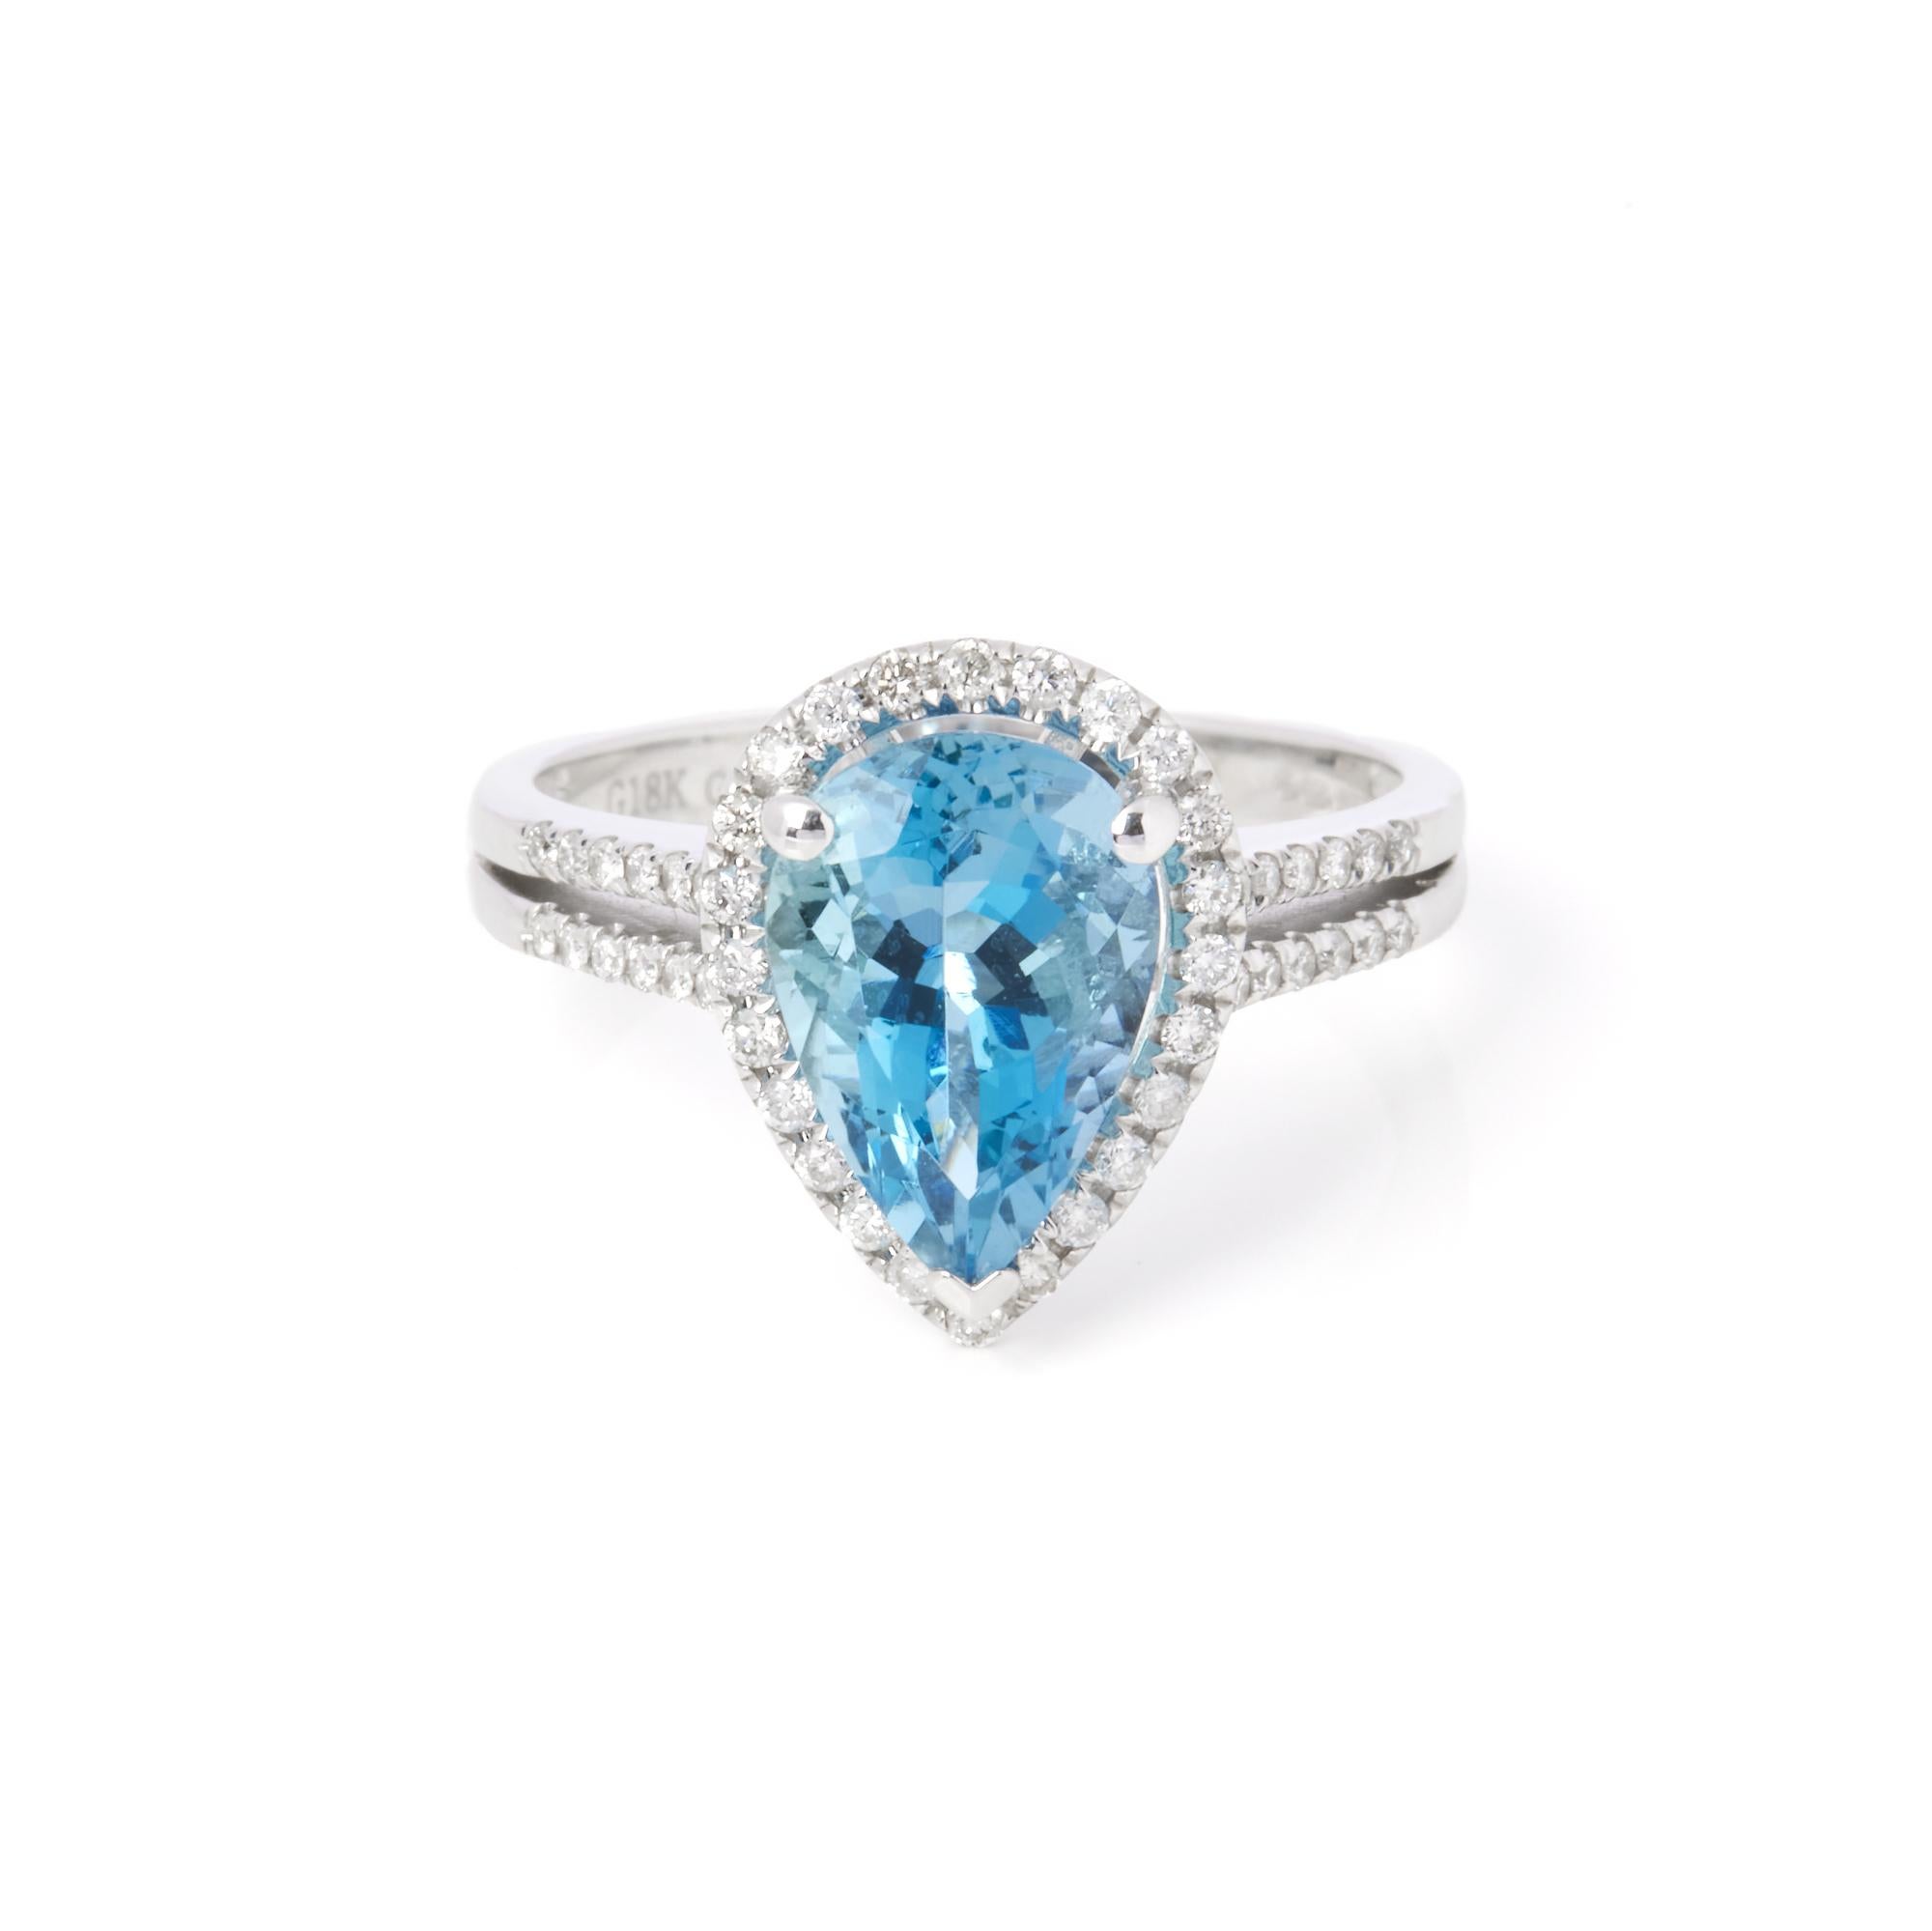 This ring is from the private collection of gemstone jewellery individually designed by David Jerome. It features a pear cut aquamarine set with diamonds. Accompanied by an IGR gem certificate. UK ring size N. EU ring size 54. US ring size 7. 